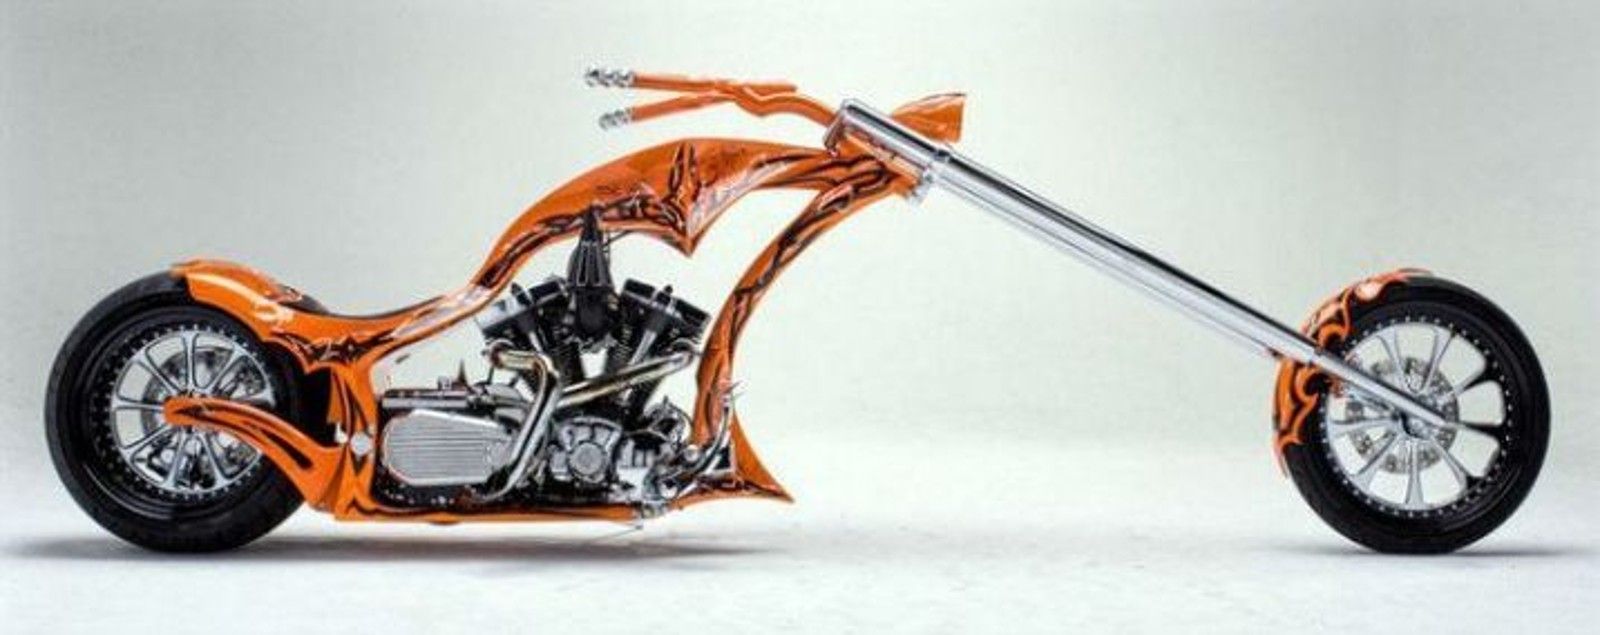 A Picture Of The The Yamaha BMS Chopper